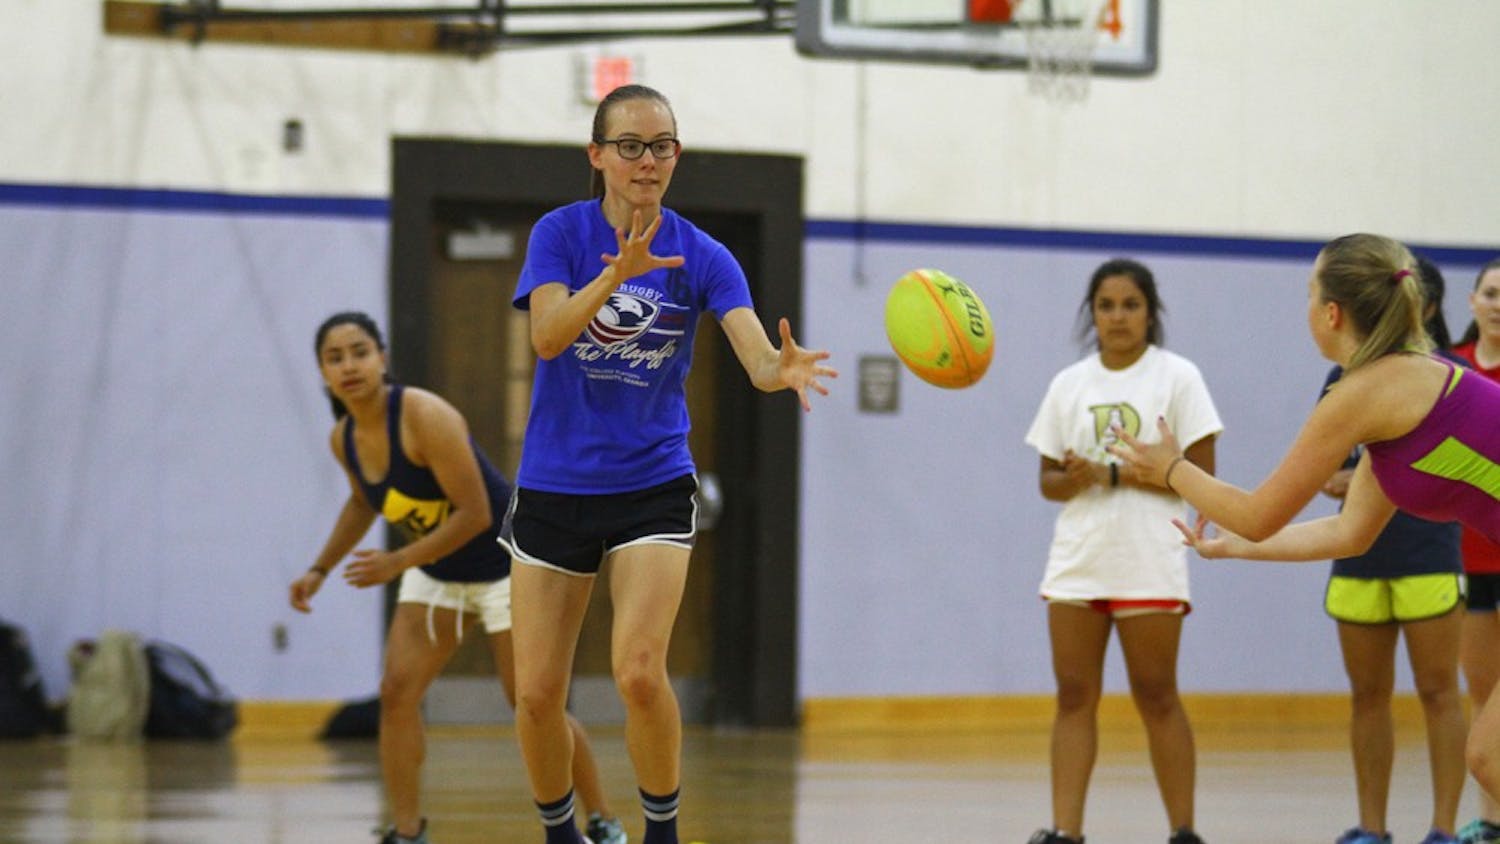 Alicia Wood, a senior environmental science major, prepares to catch the ball during a practice exercise.